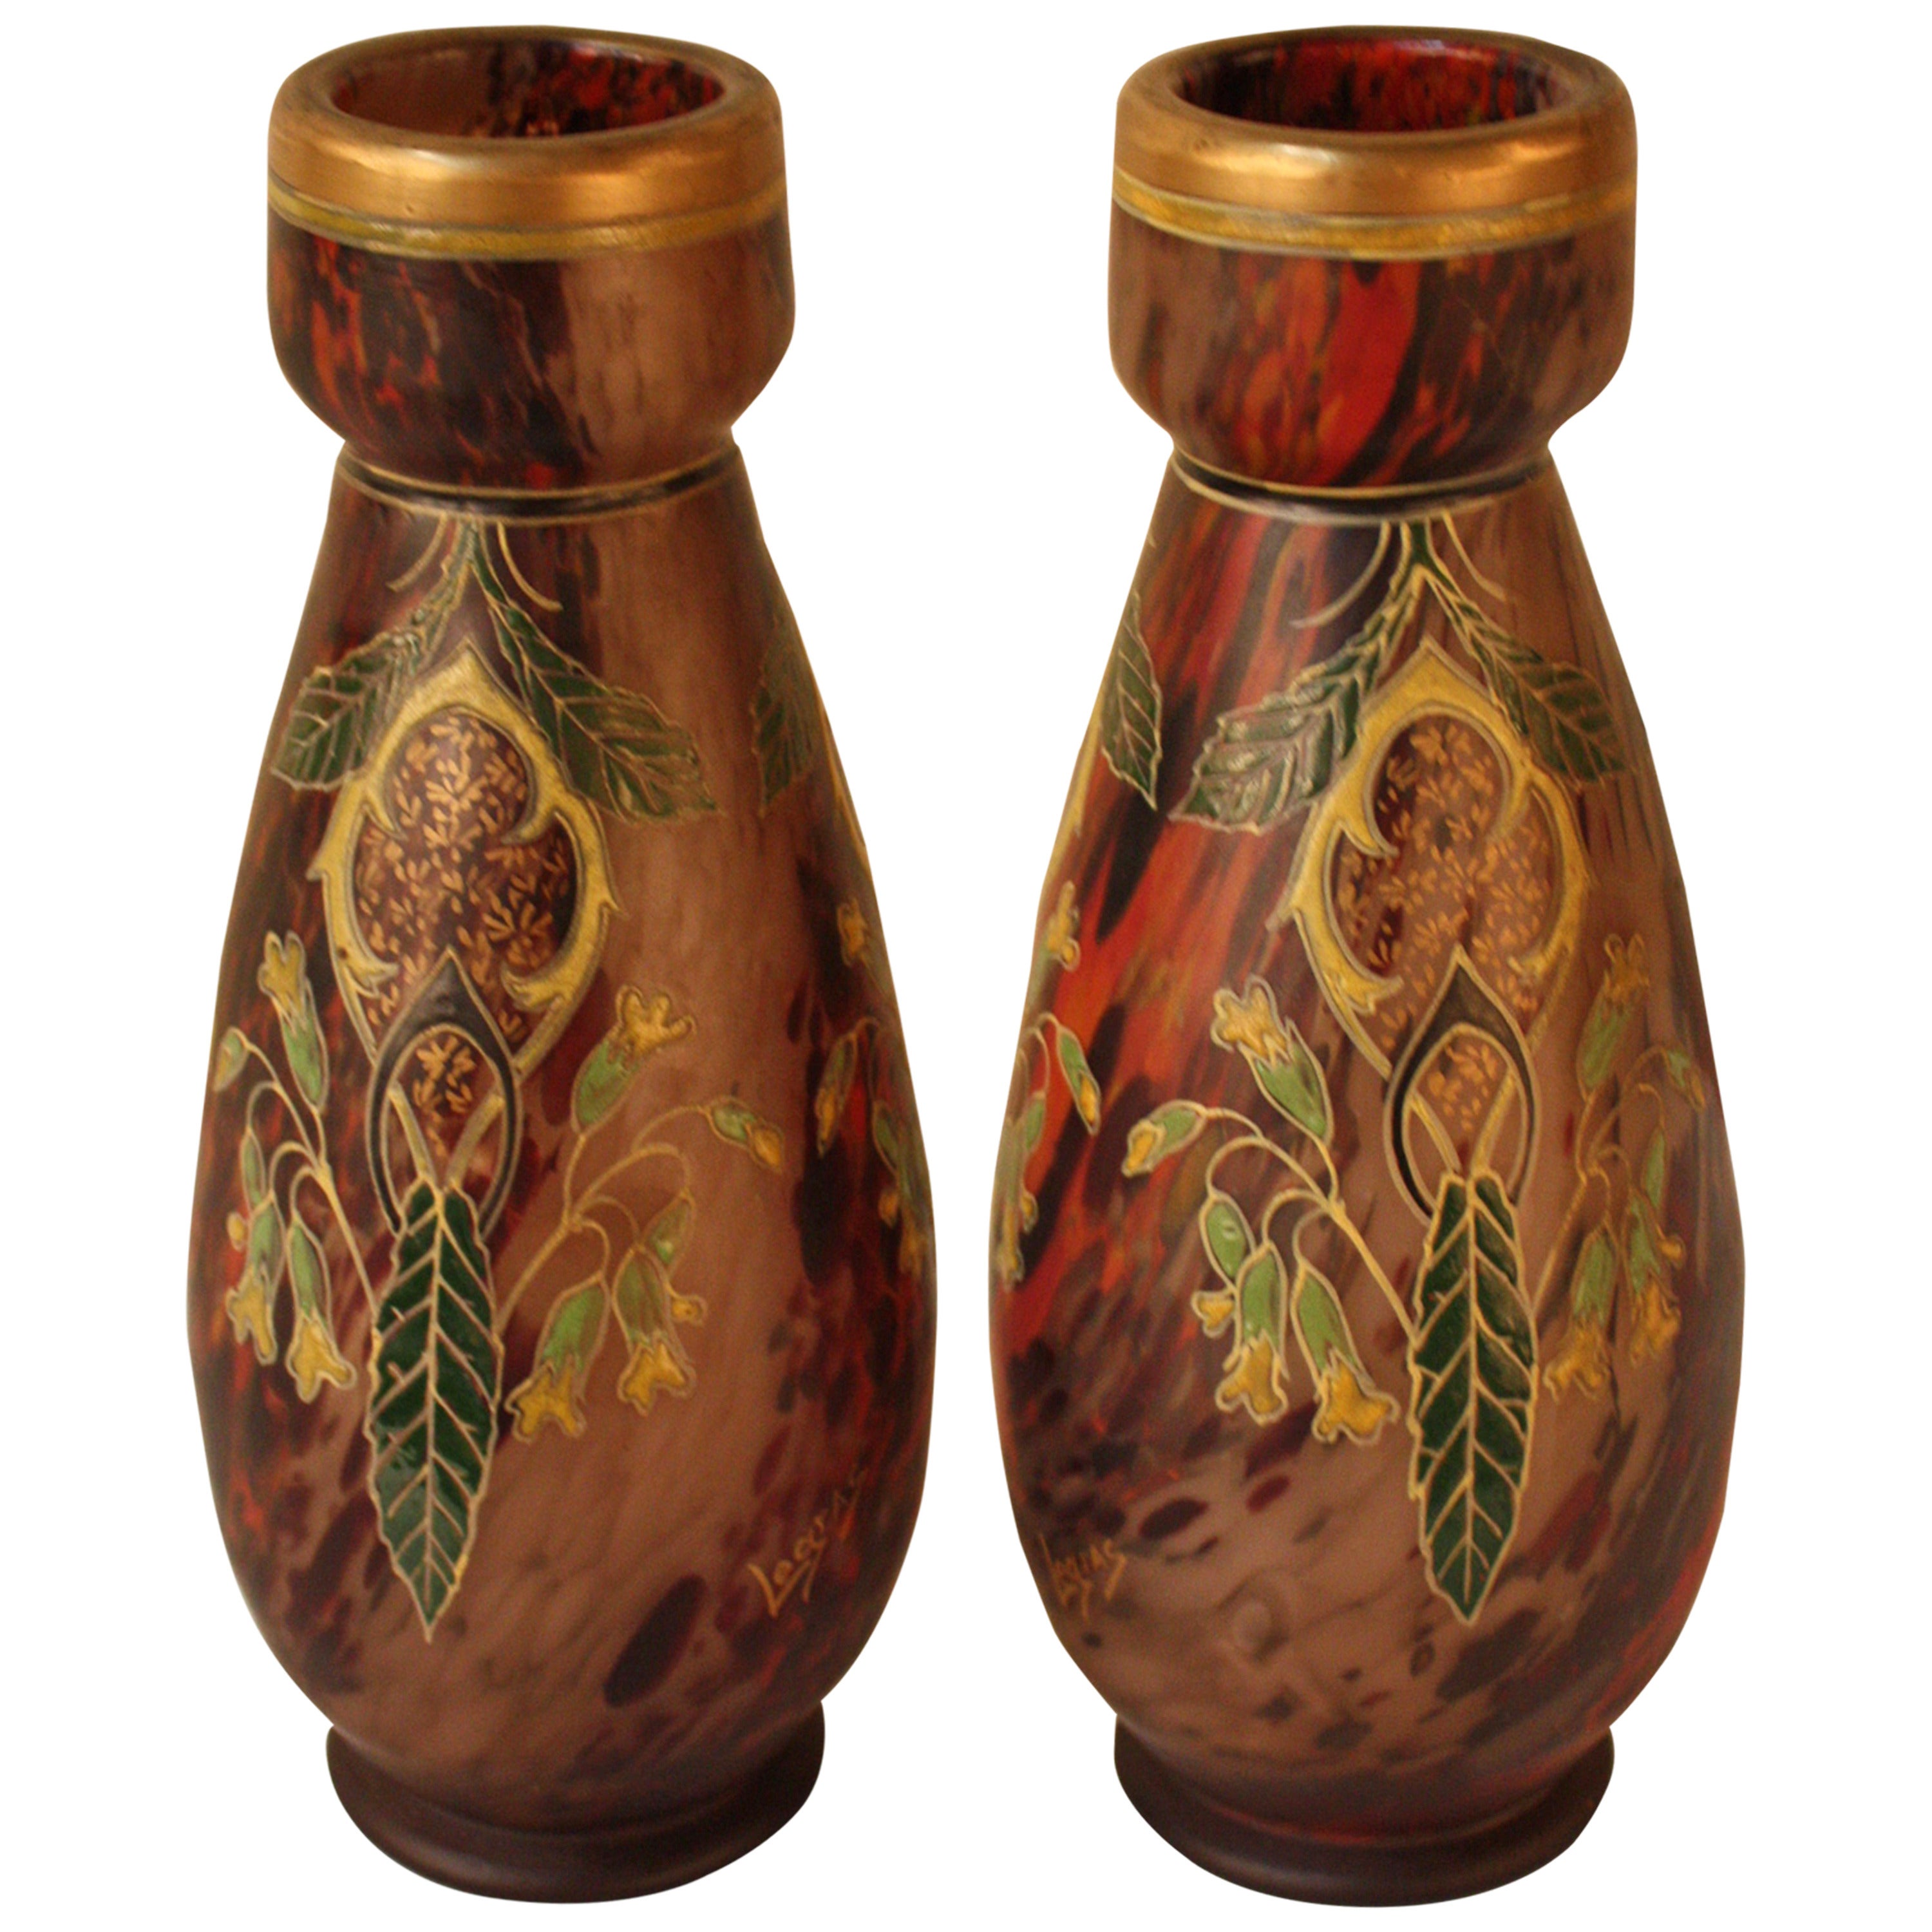 Pair of Hand-Painted Blown Glass Vases by Legras